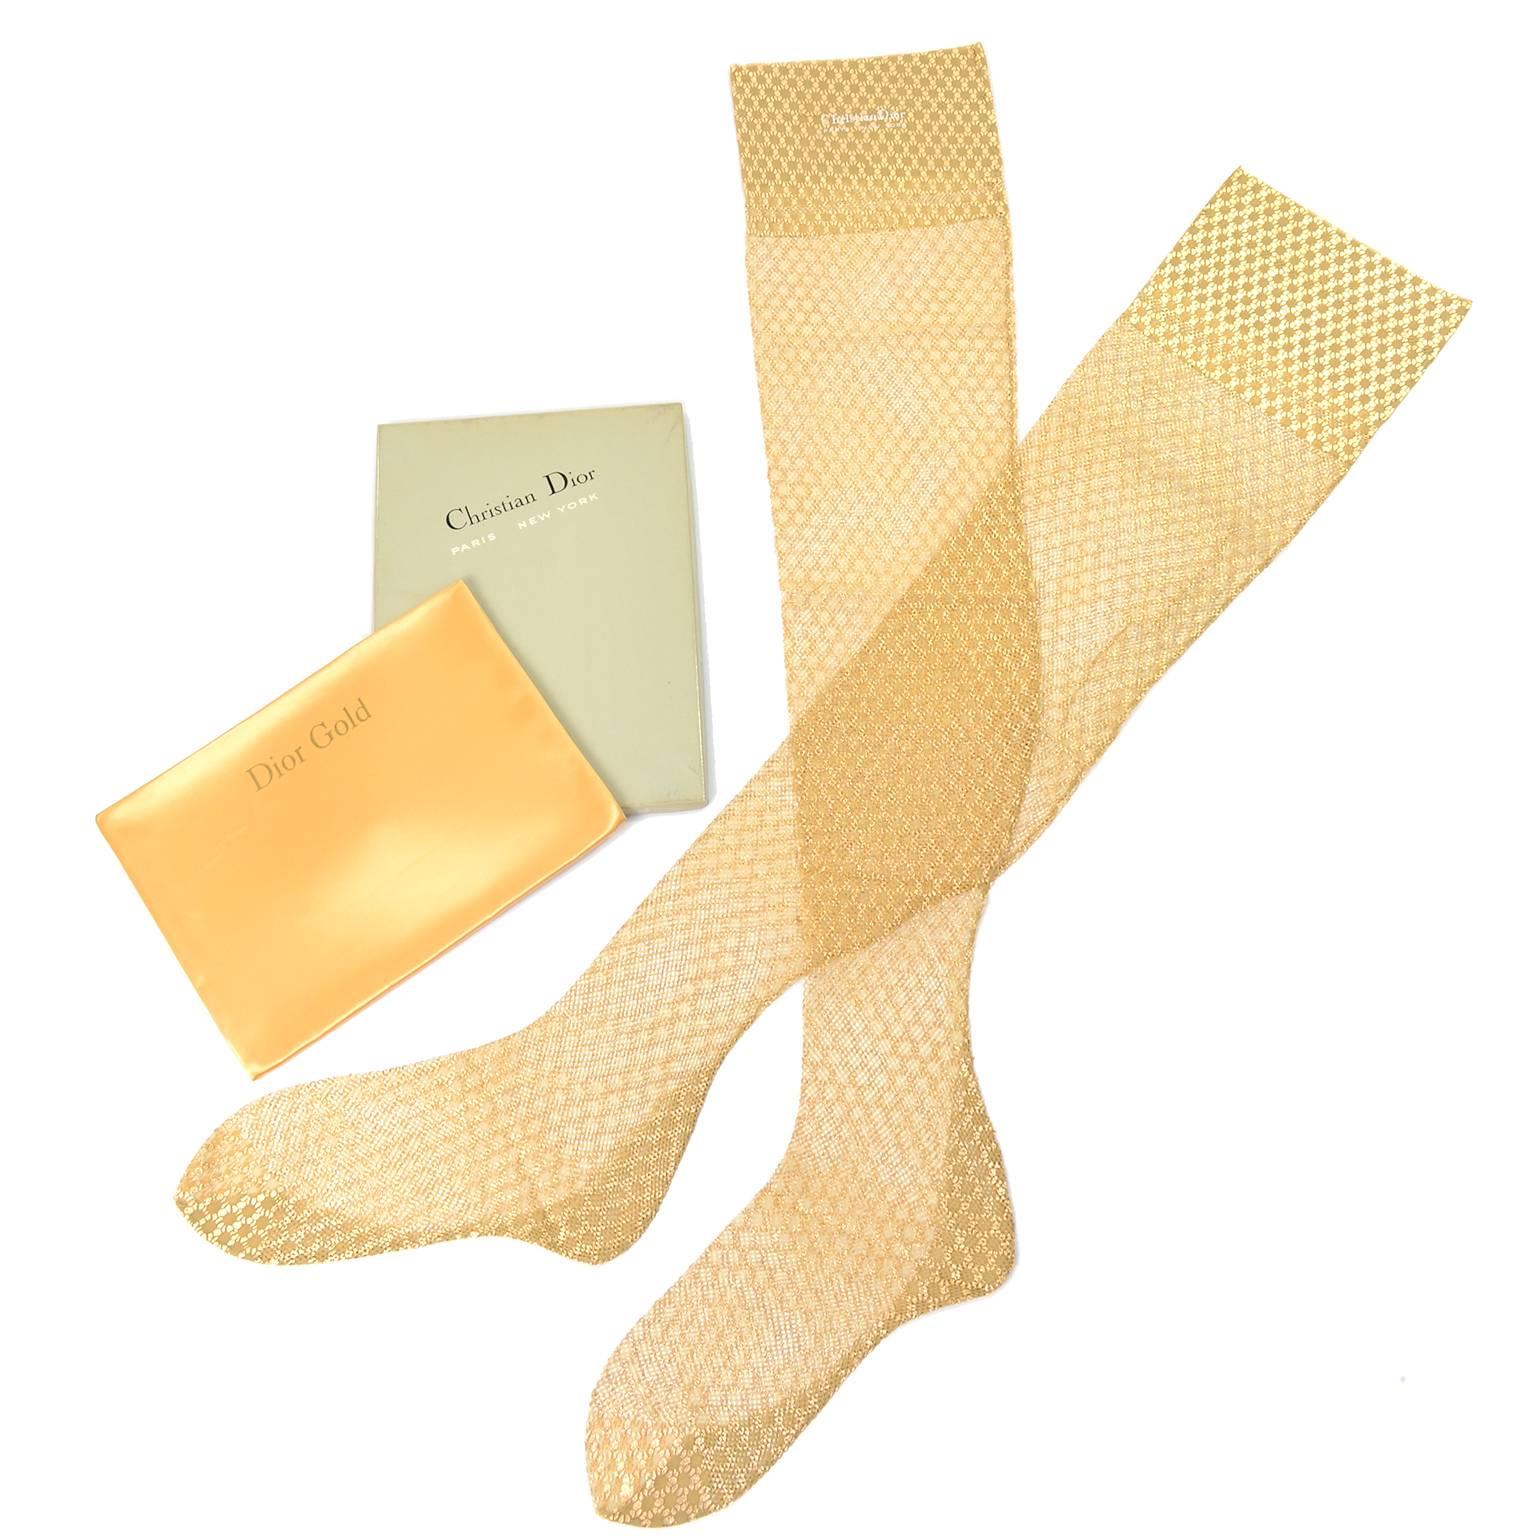 Rare Vintage Christian Dior Gold Metallic Stockings NEW in Box With Lingerie Bag